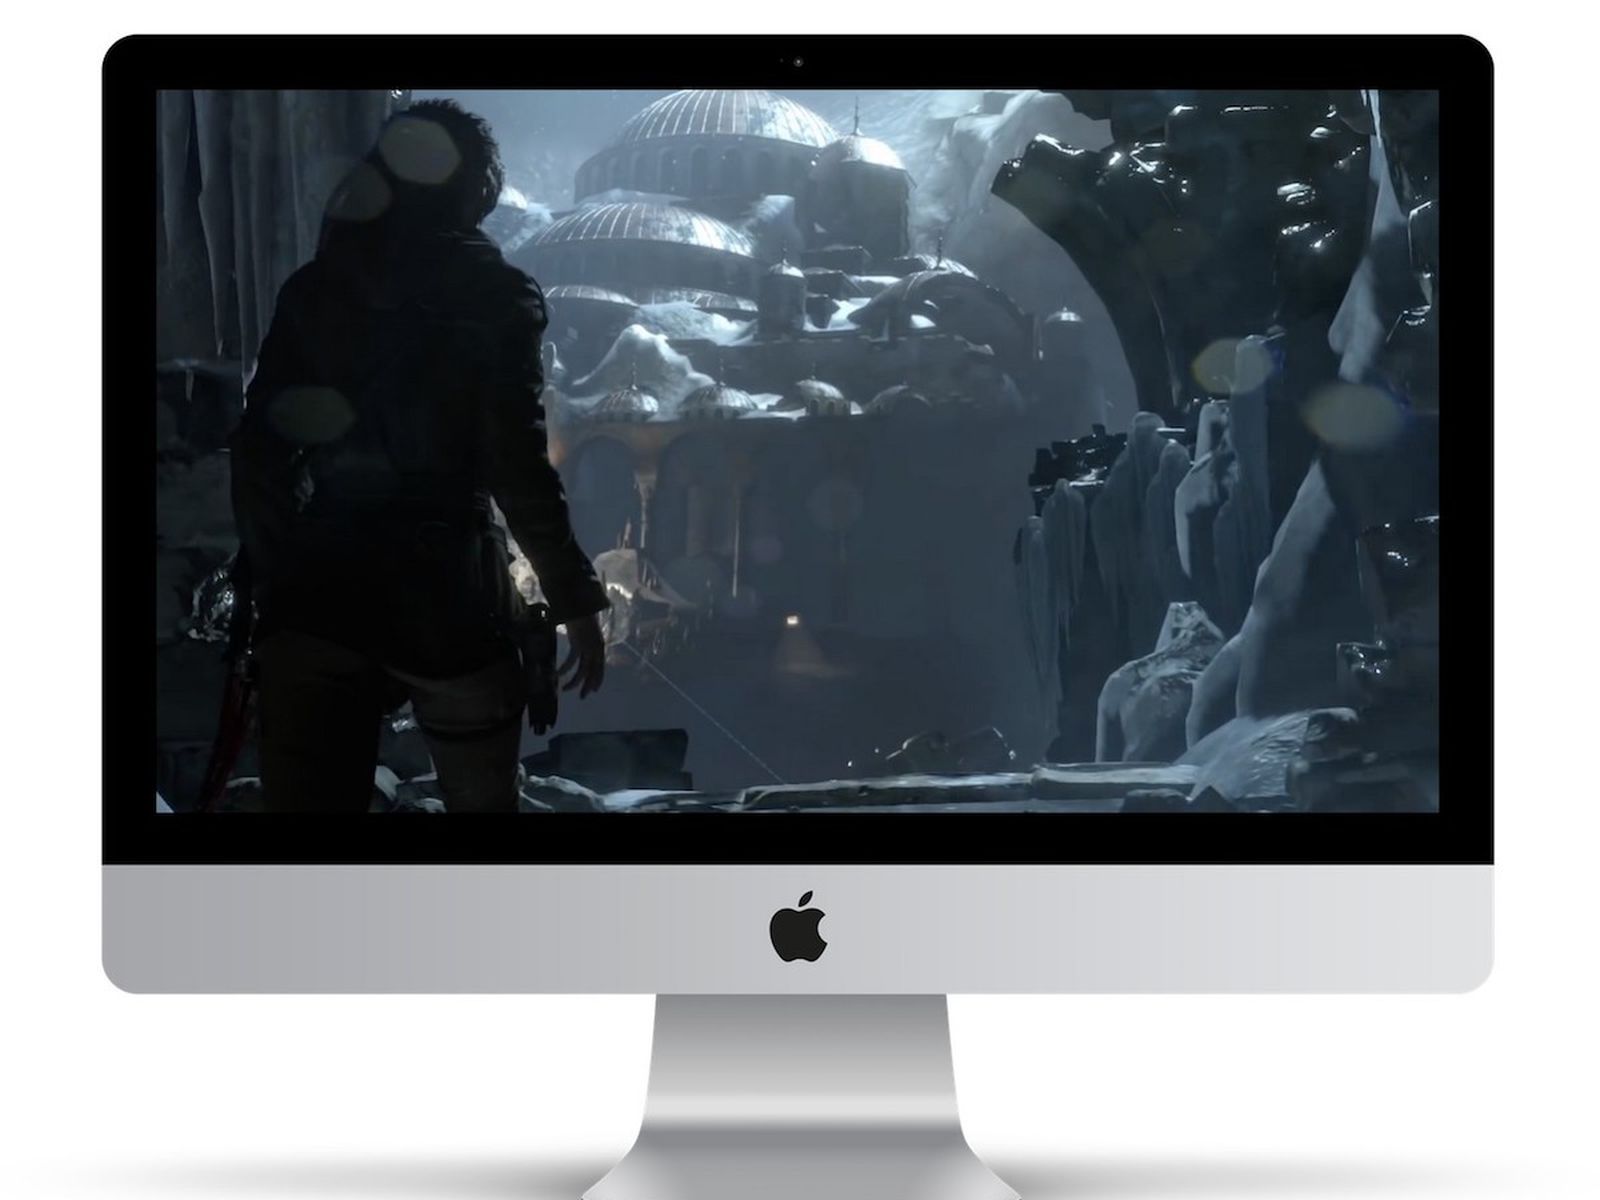 Rise of the Tomb Raider™: 20 Year Celebration for Mac and Linux - About